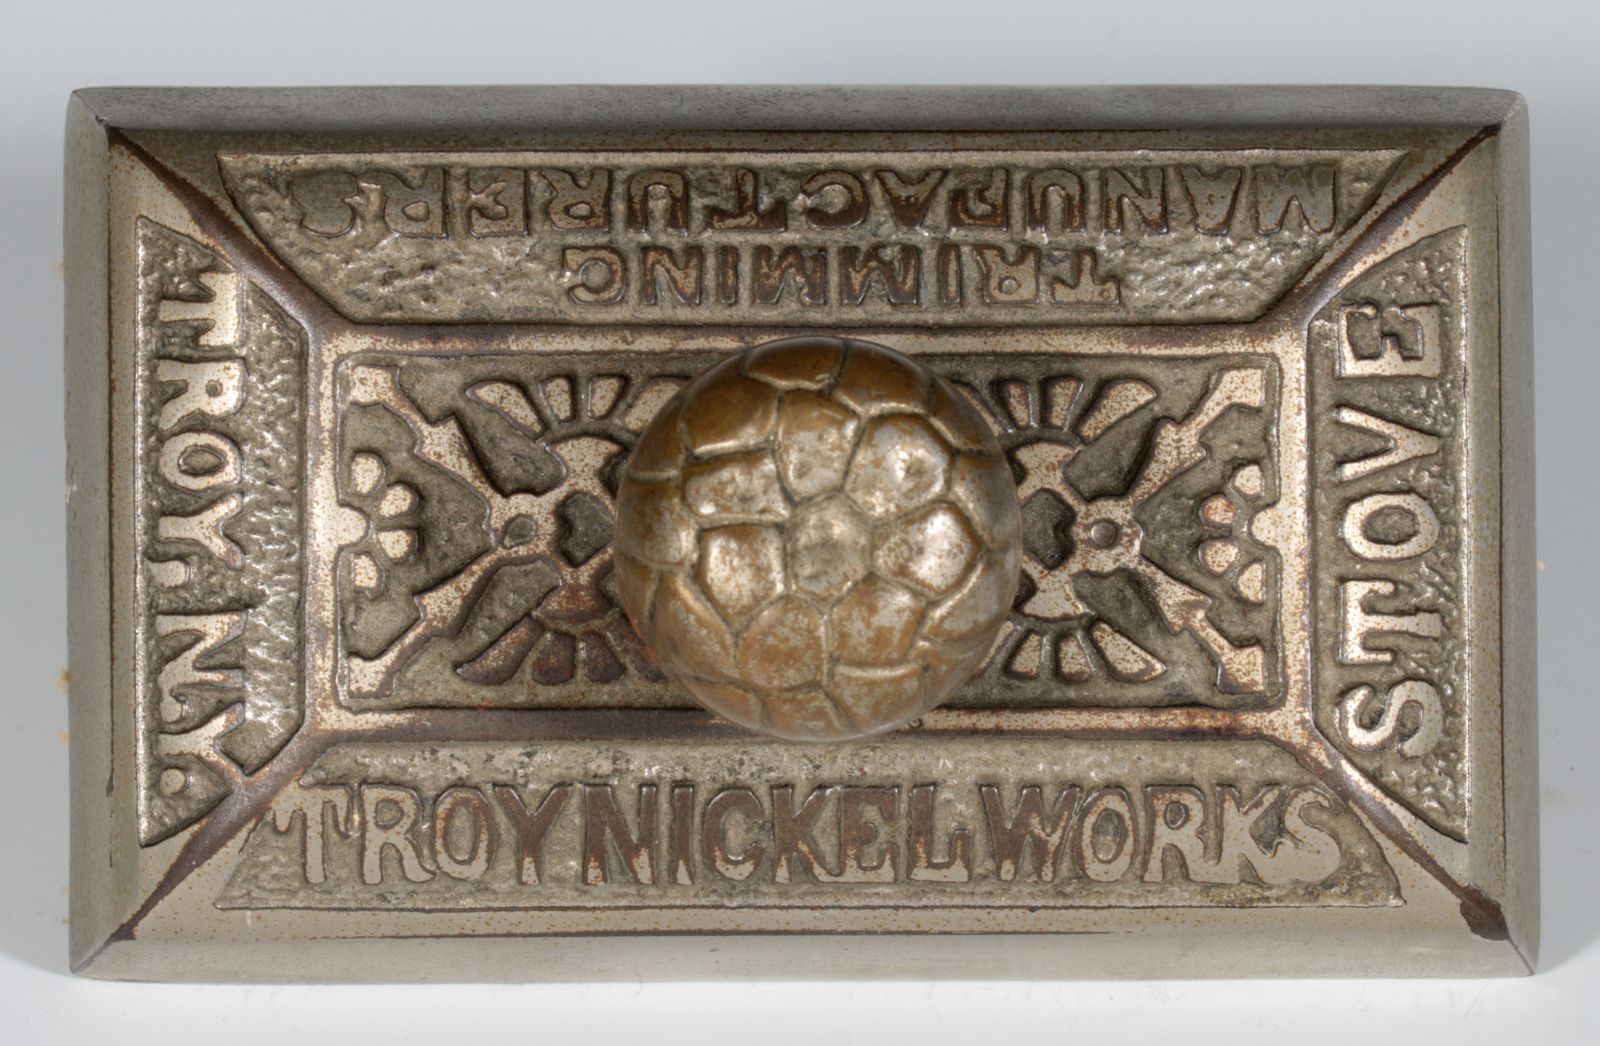 ANTIQUE TROY NICKEL WORKS STOVE CO. PAPERWEIGHT